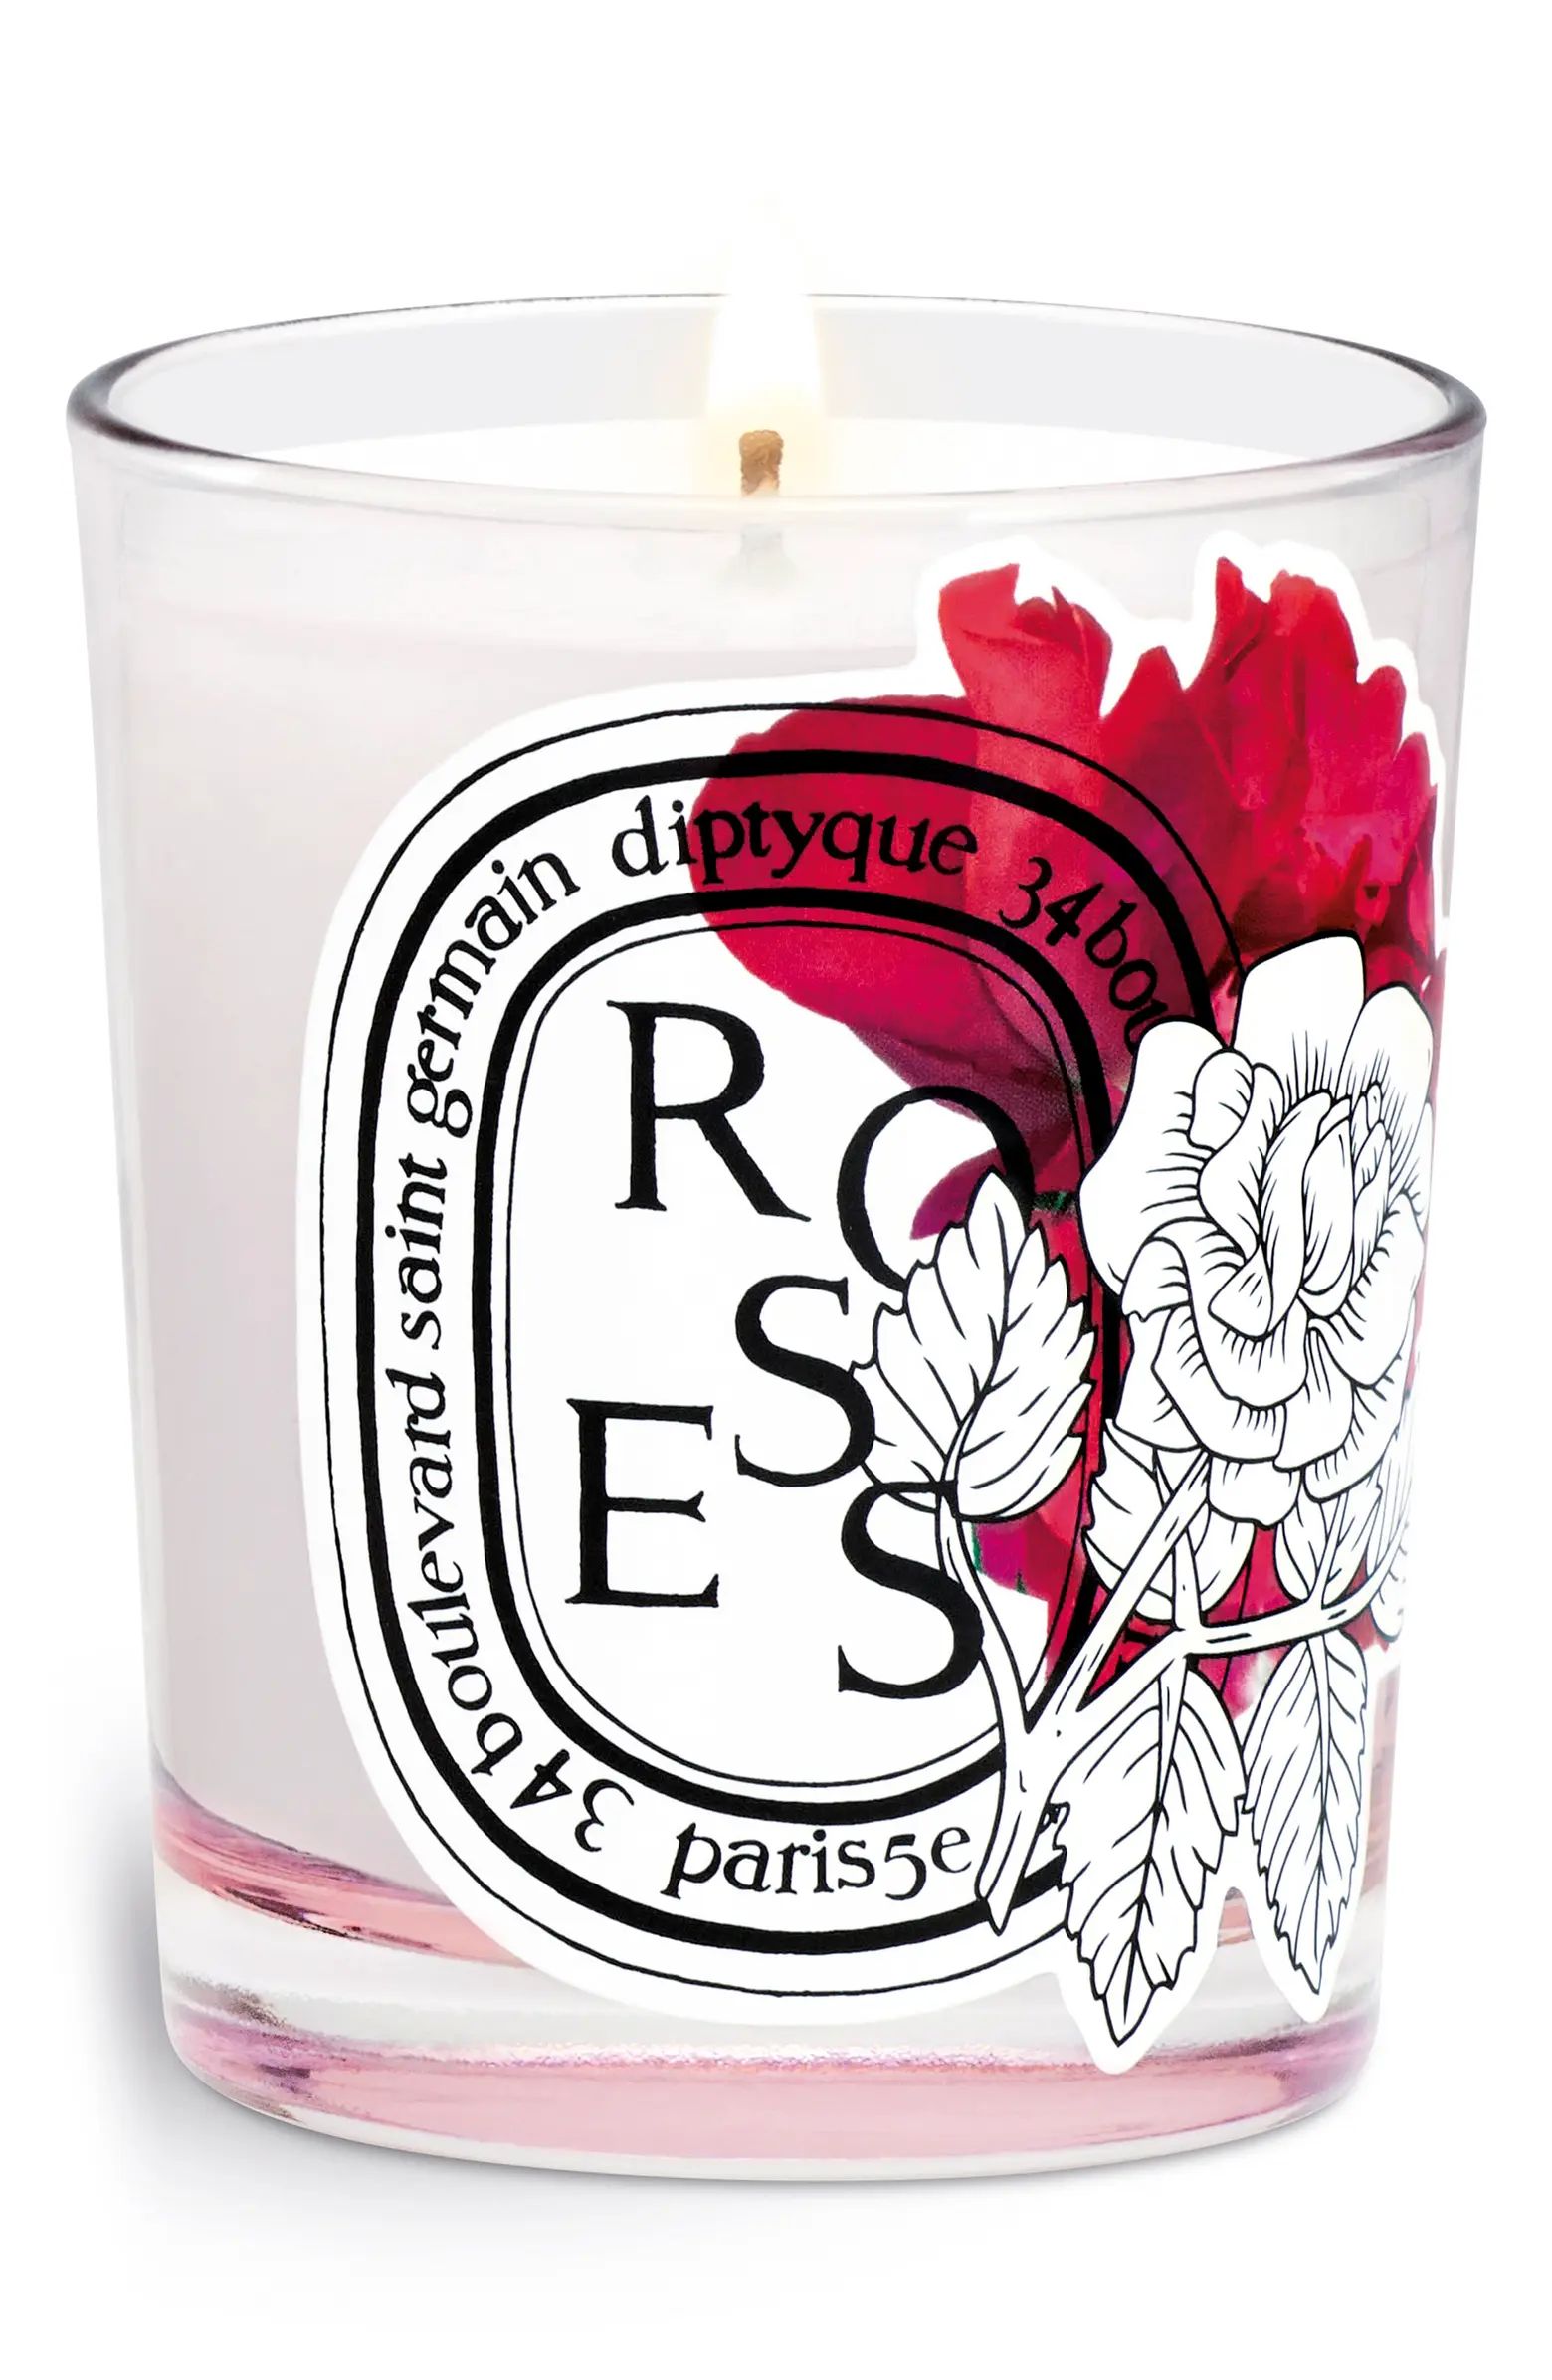 diptyque Roses Candle | Nordstrom | Nordstrom